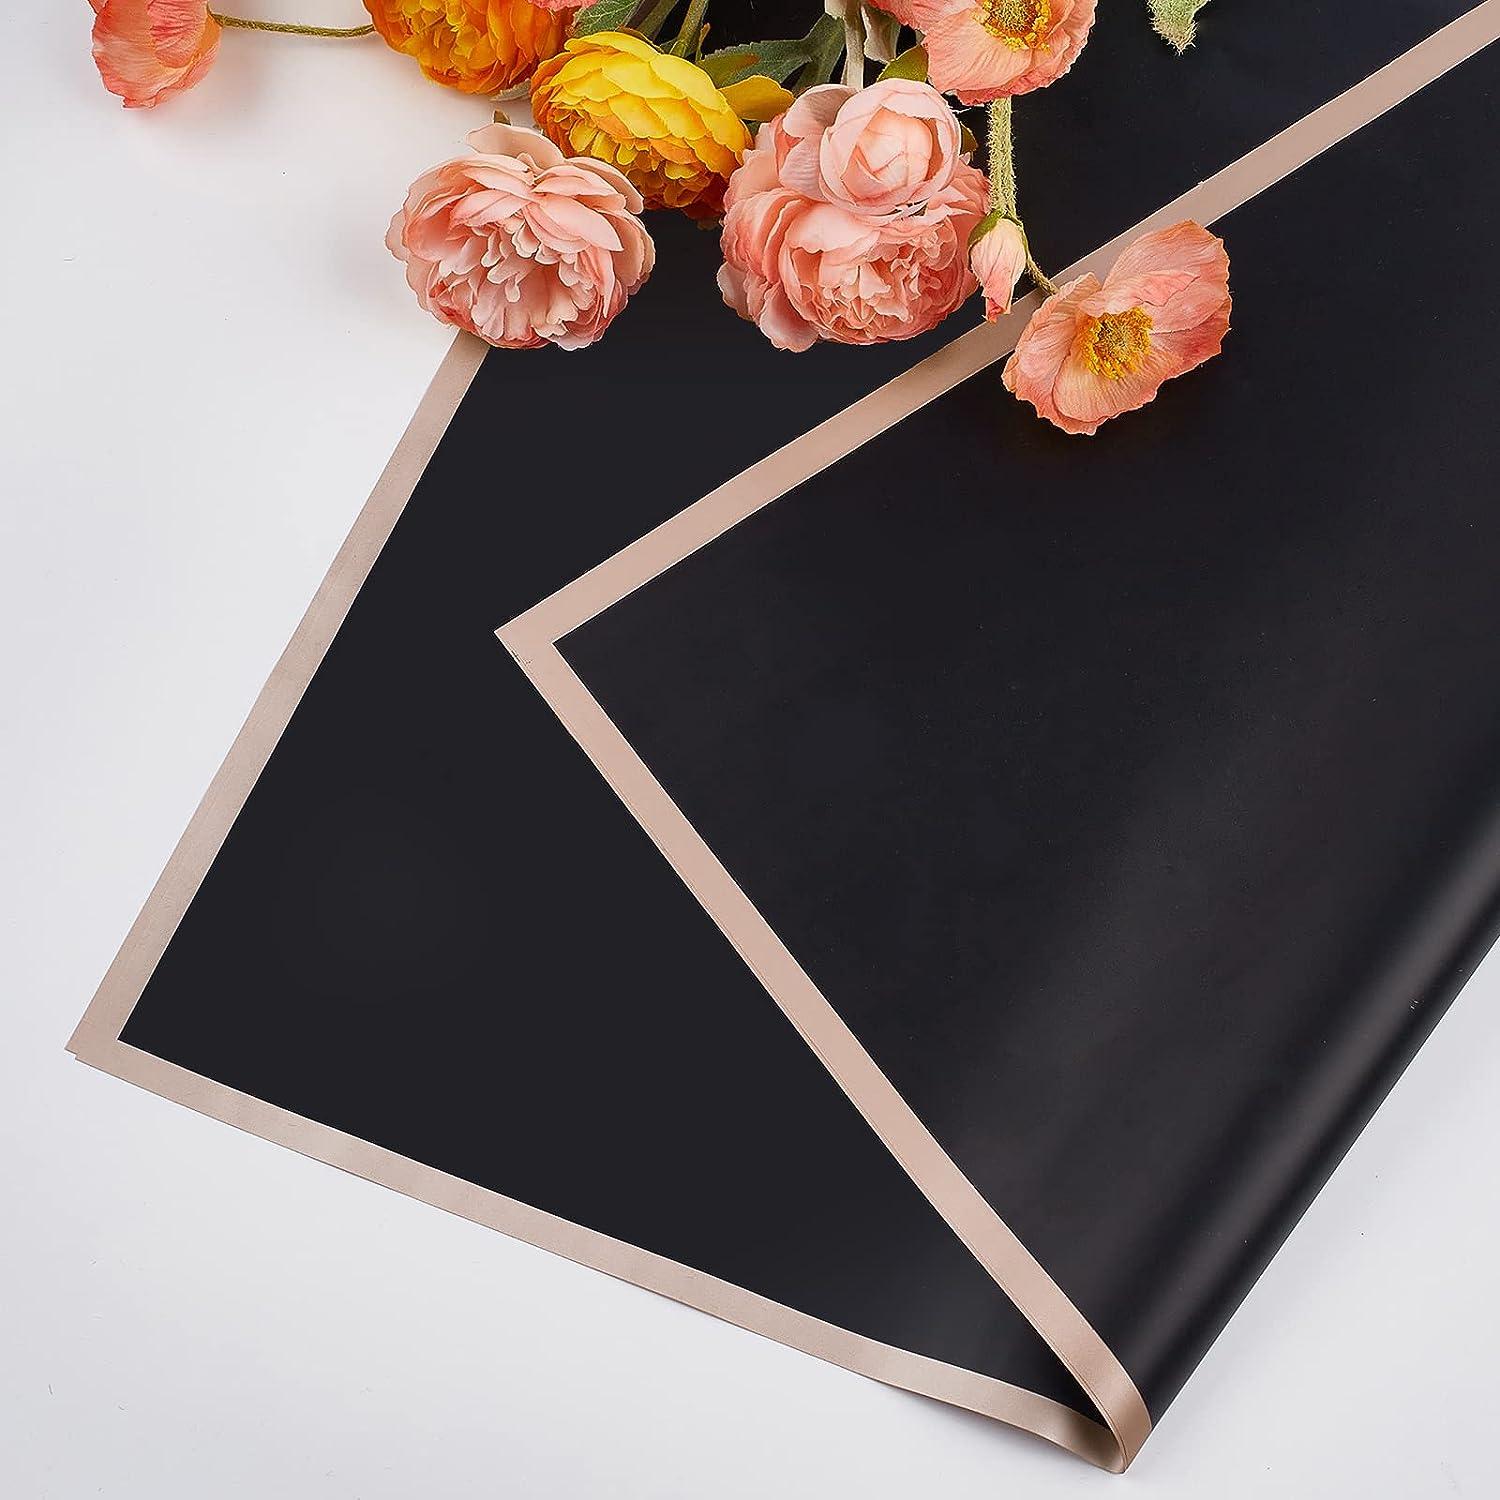 Pomoko Waterproof Floral Wrapping Paper Sheets Fresh Flowers Bouquet Gift Packaging Korean Florist Supplies, 20 Sheets, Size: 58, Black